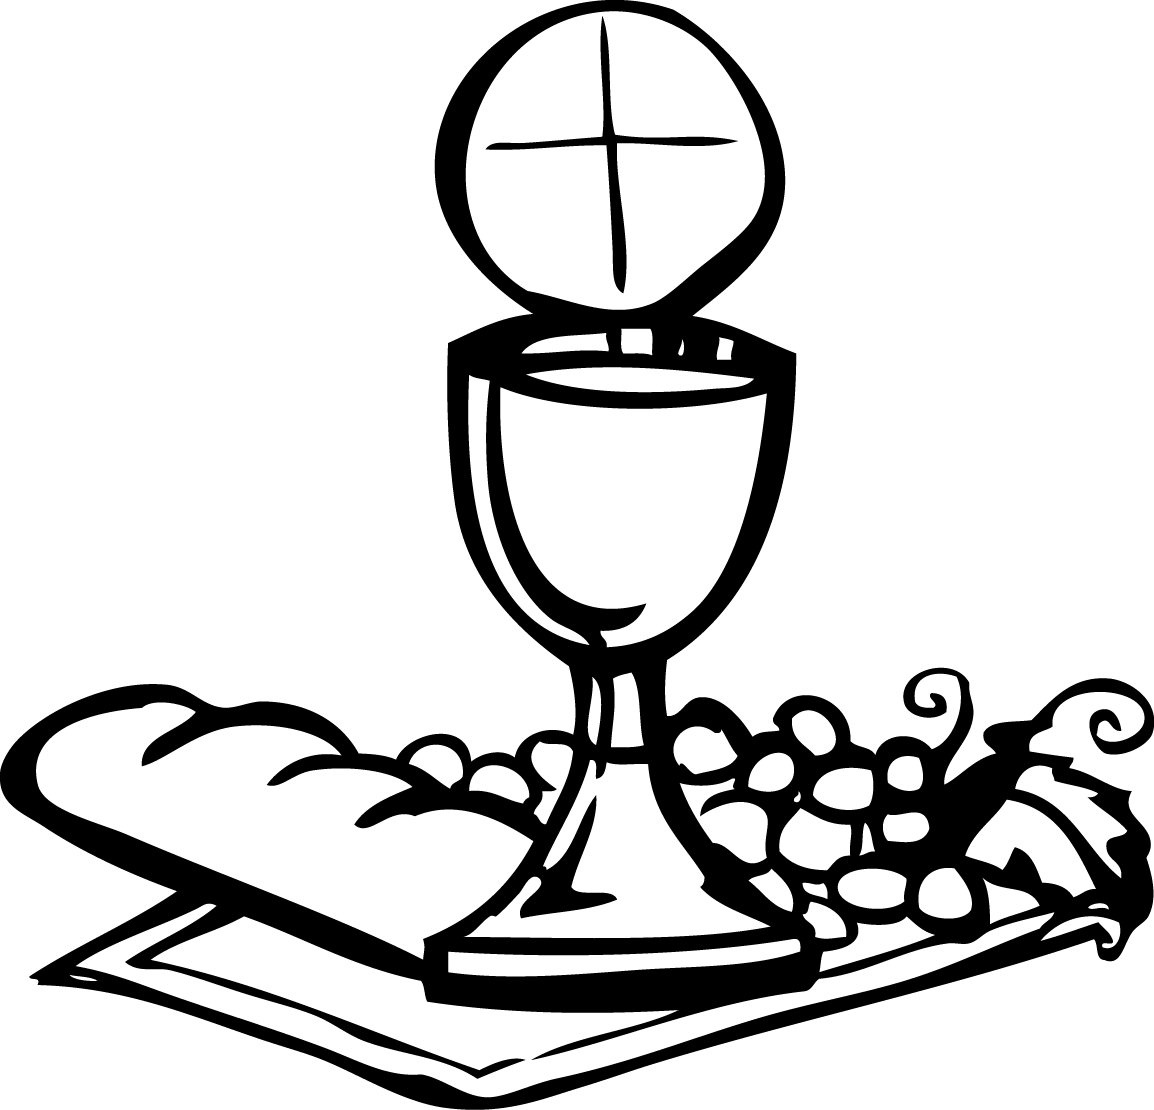 Communion Cup Clip Art Free Cliparts That You Can Download To You    